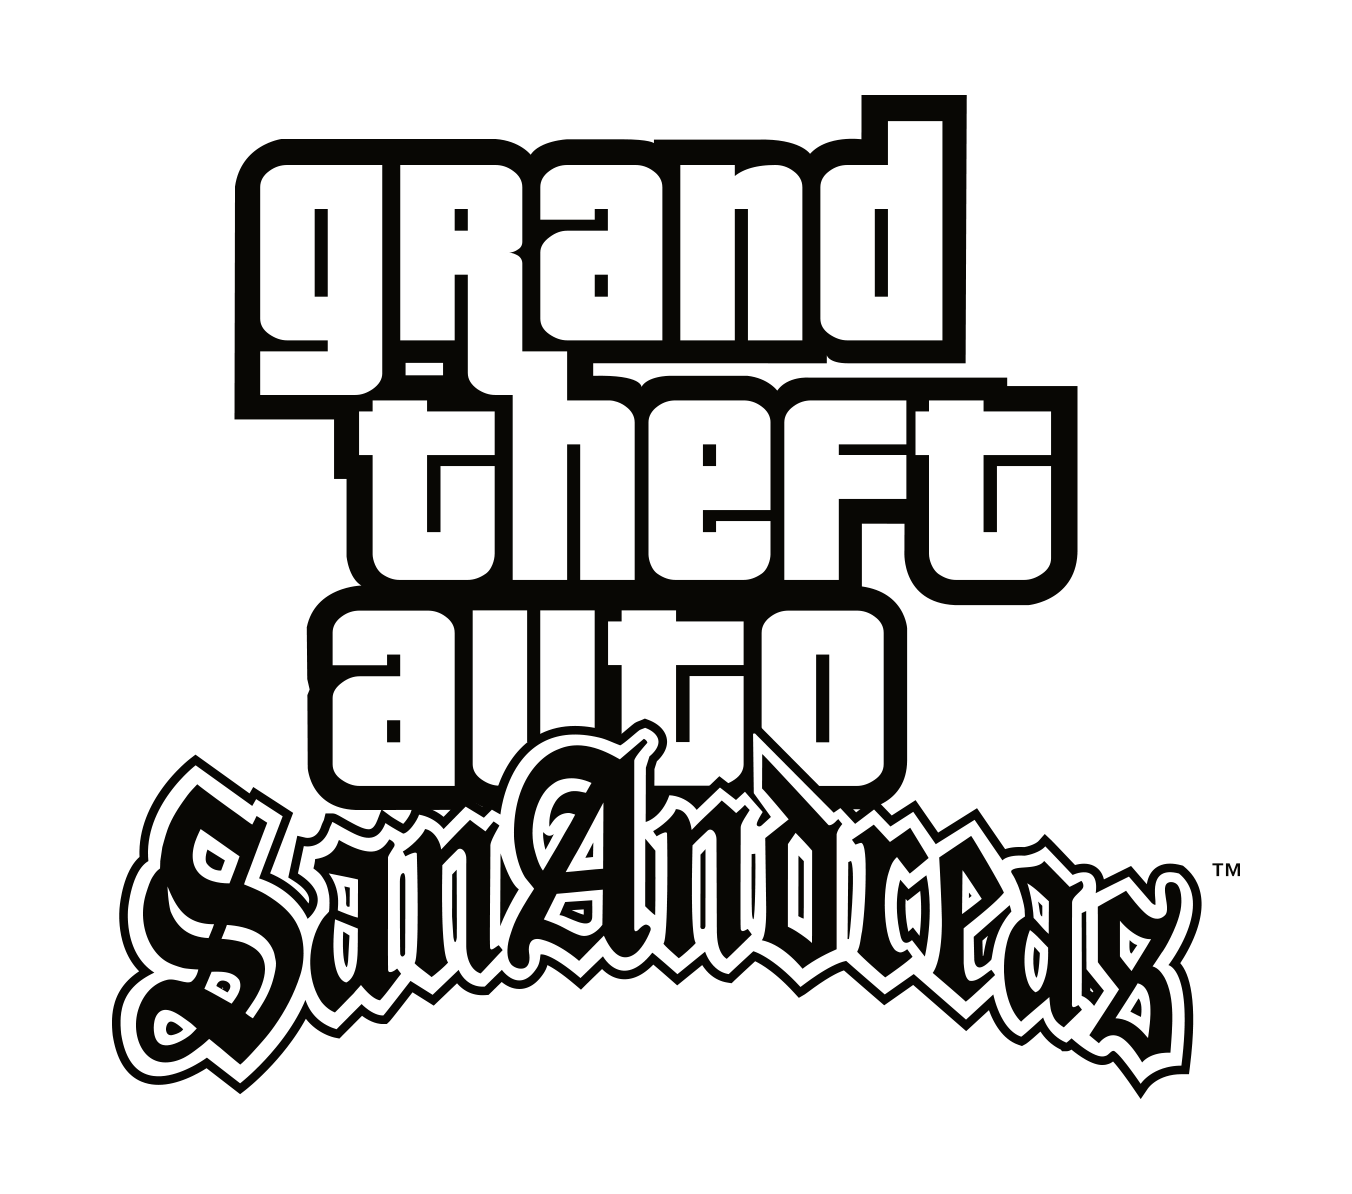 Gta san andreas pic picture